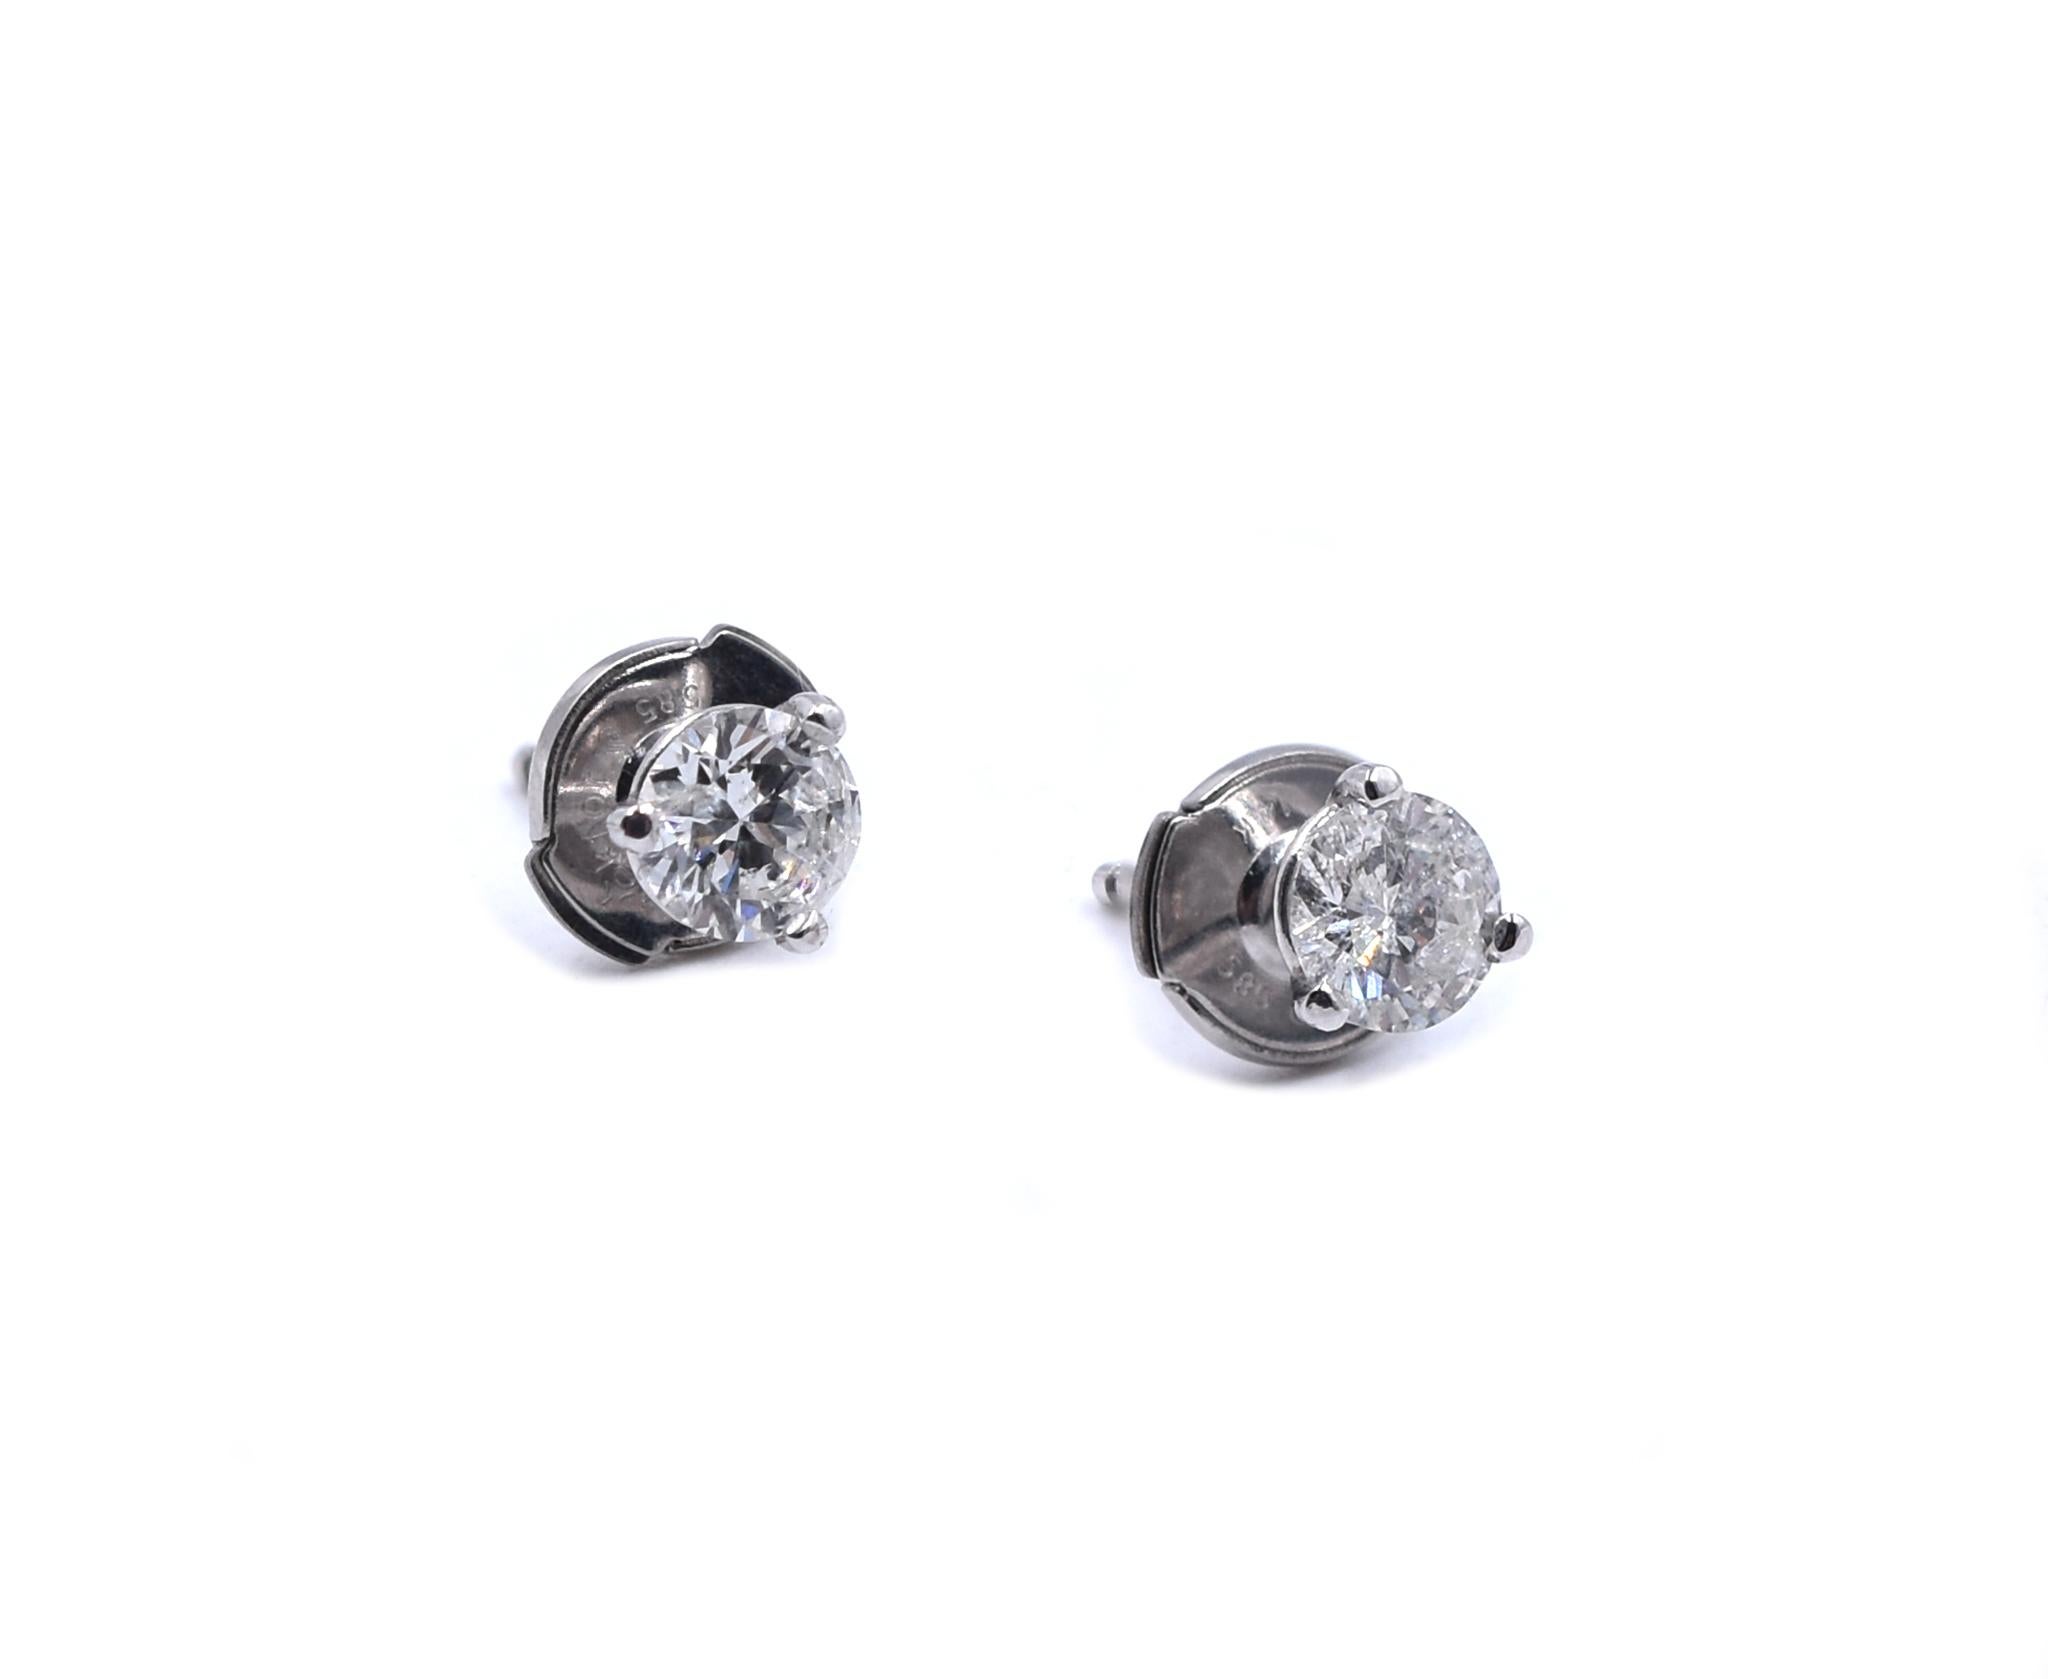 Material: 14k white gold
Diamond: 2 round brilliant cut = .65cttw
Color: I
Clarity: I1
Dimensions: earrings measure approximately 4.8mm in diameter
Fastenings: post with la pousette backs
Weight:  1.00 grams
